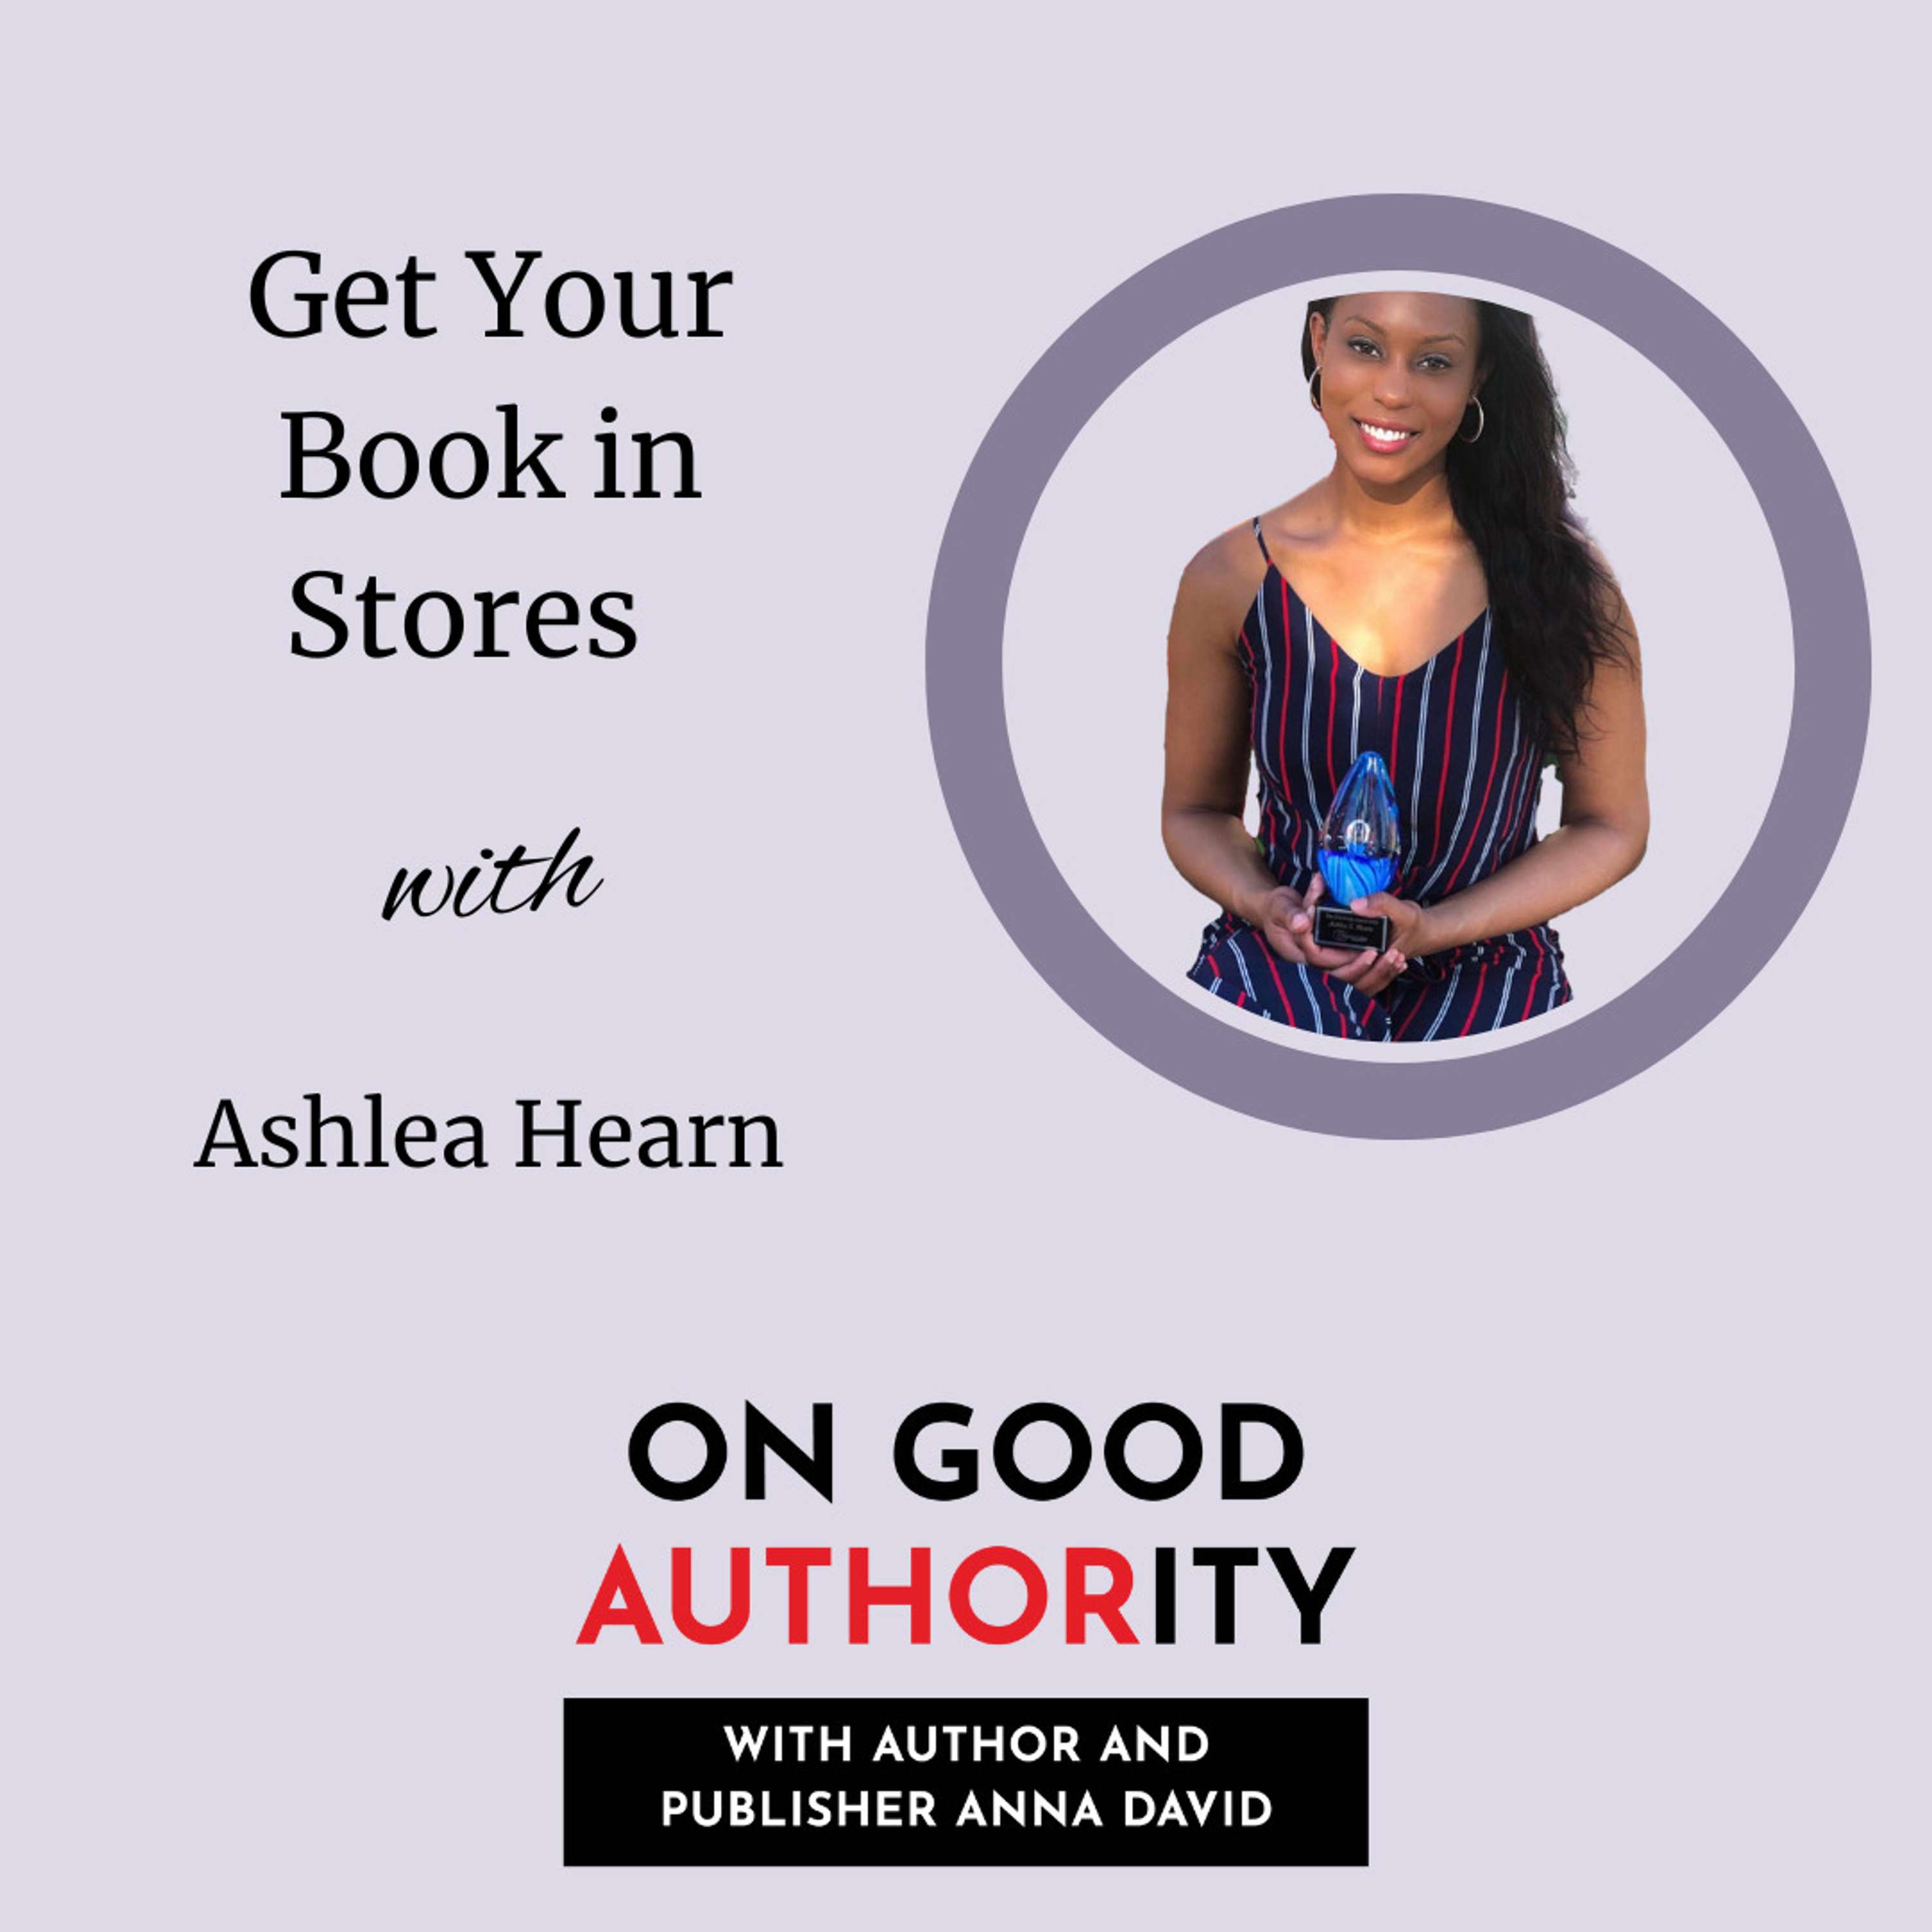 Get Your Book in Stores with Ashlea Hearn